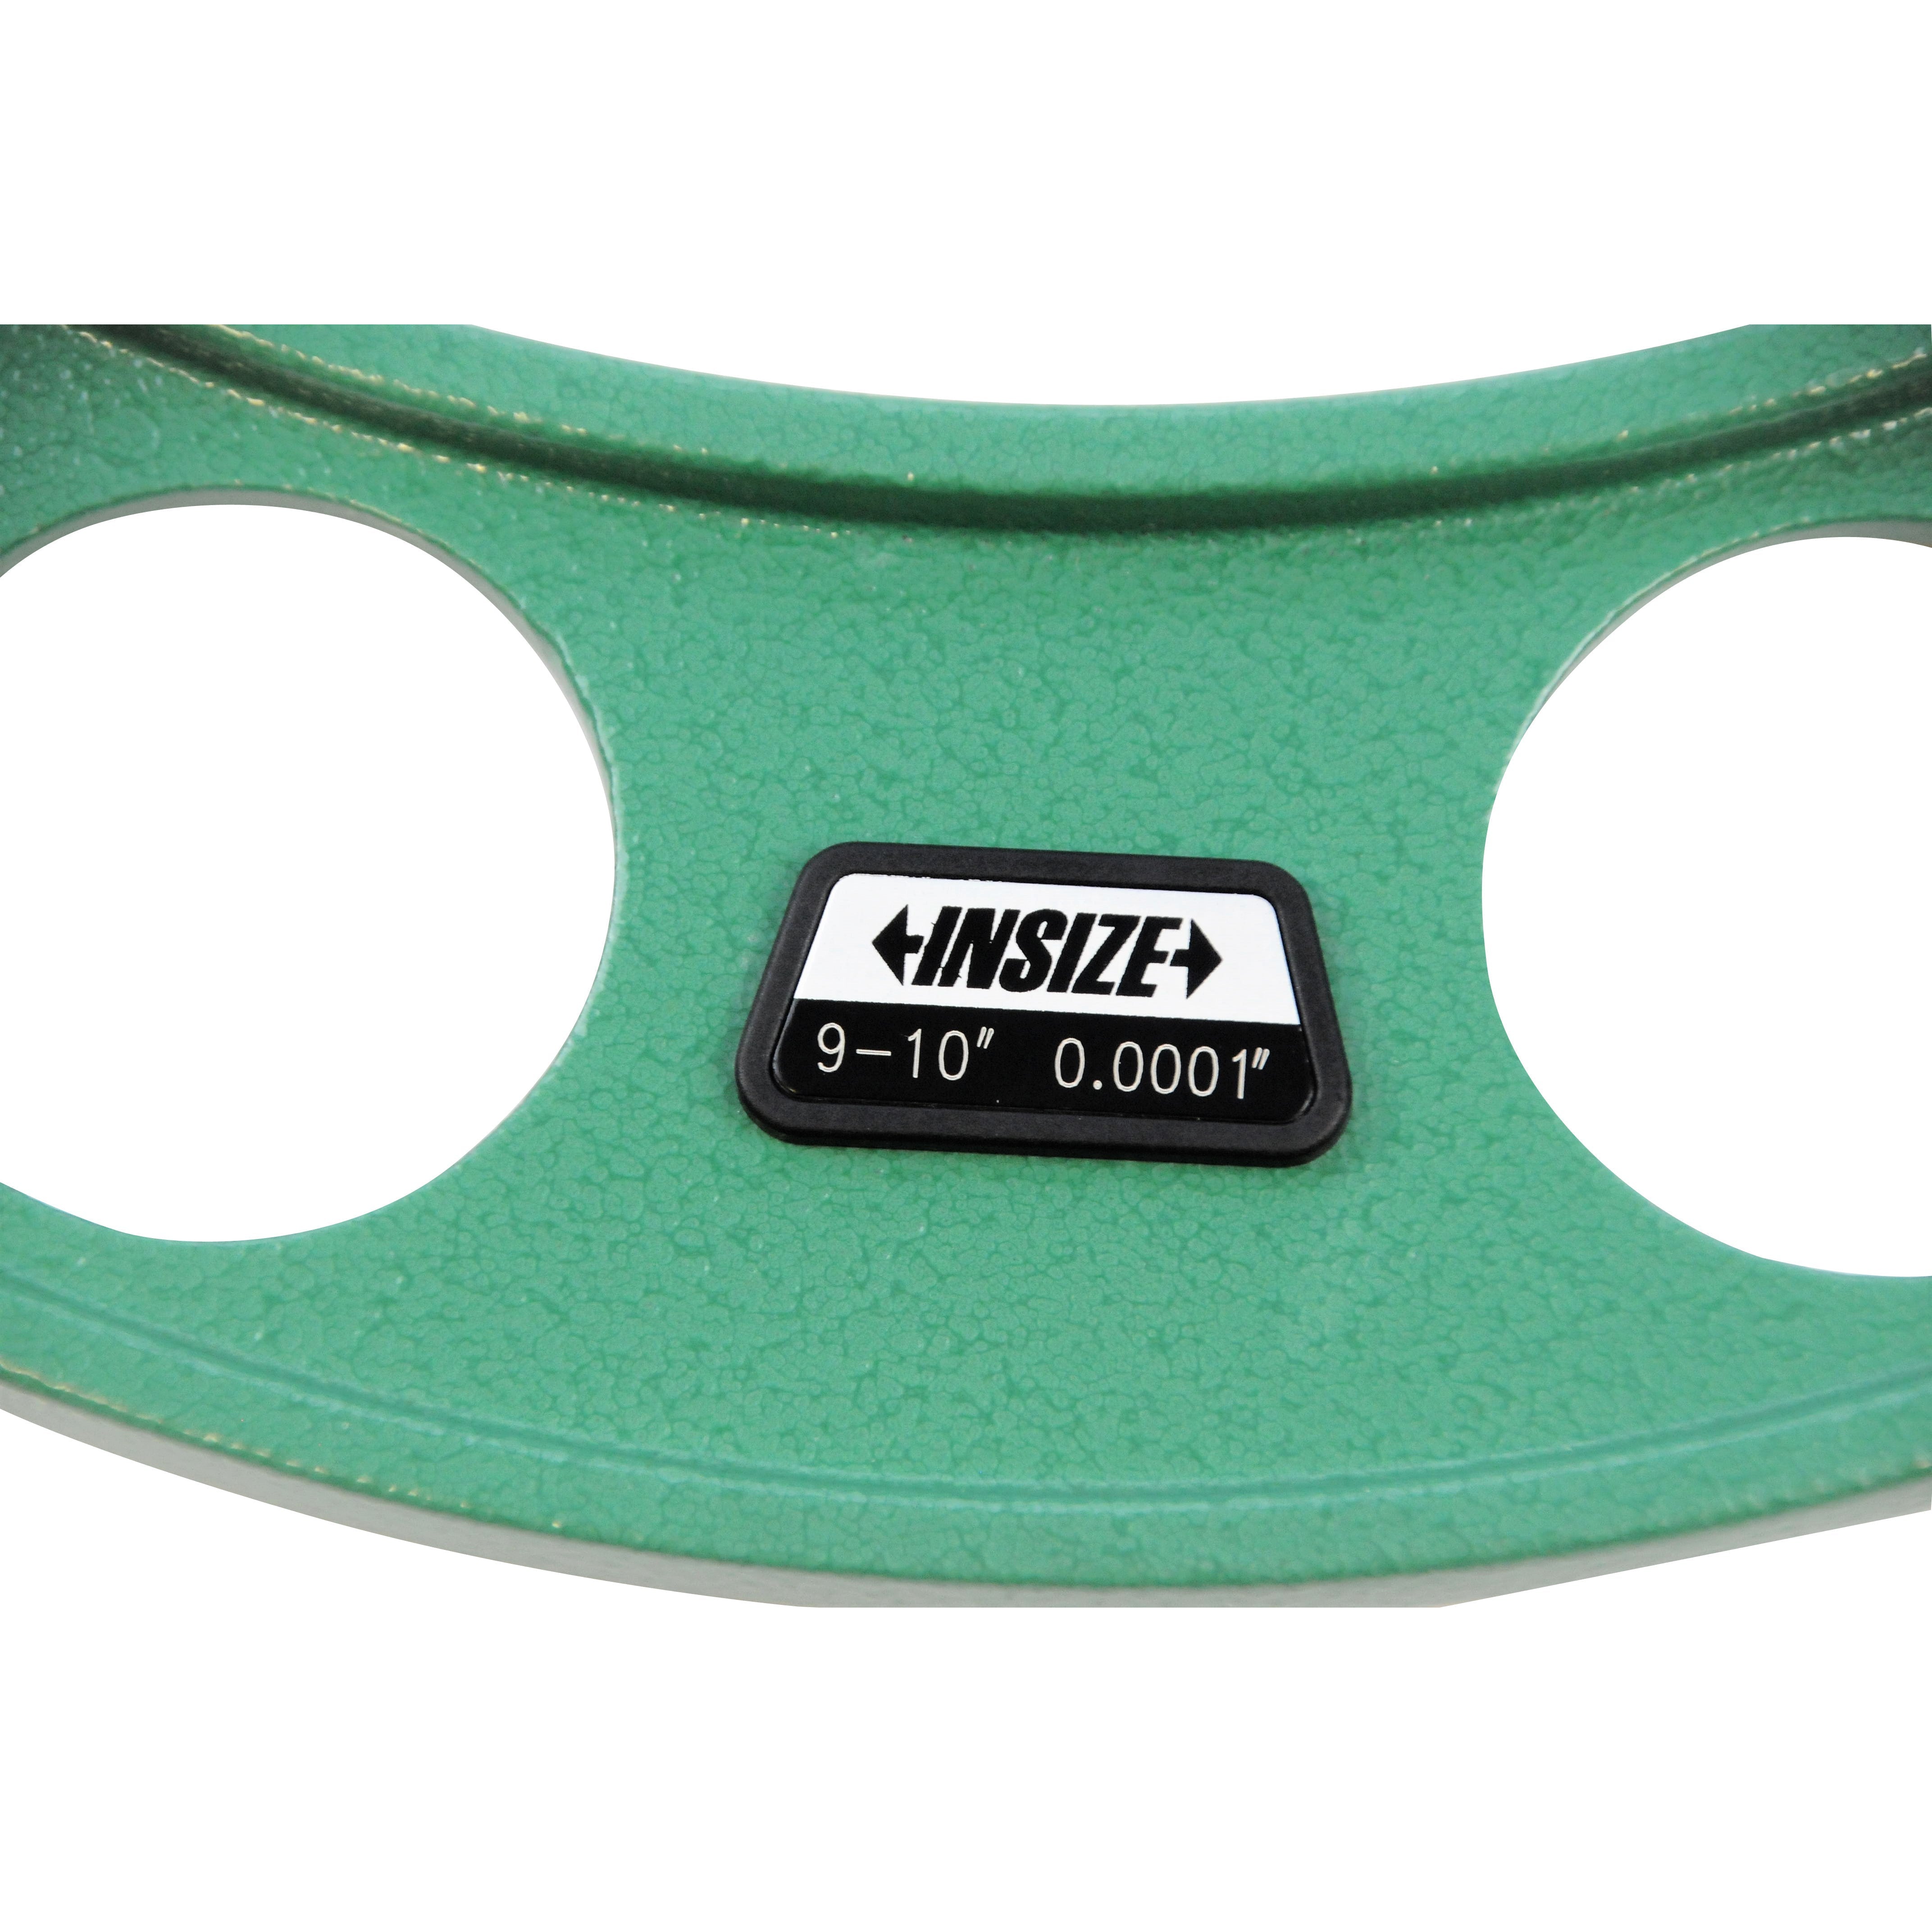 Insize Imperial Outside Micrometer 9-10" Range Series 3203-10A